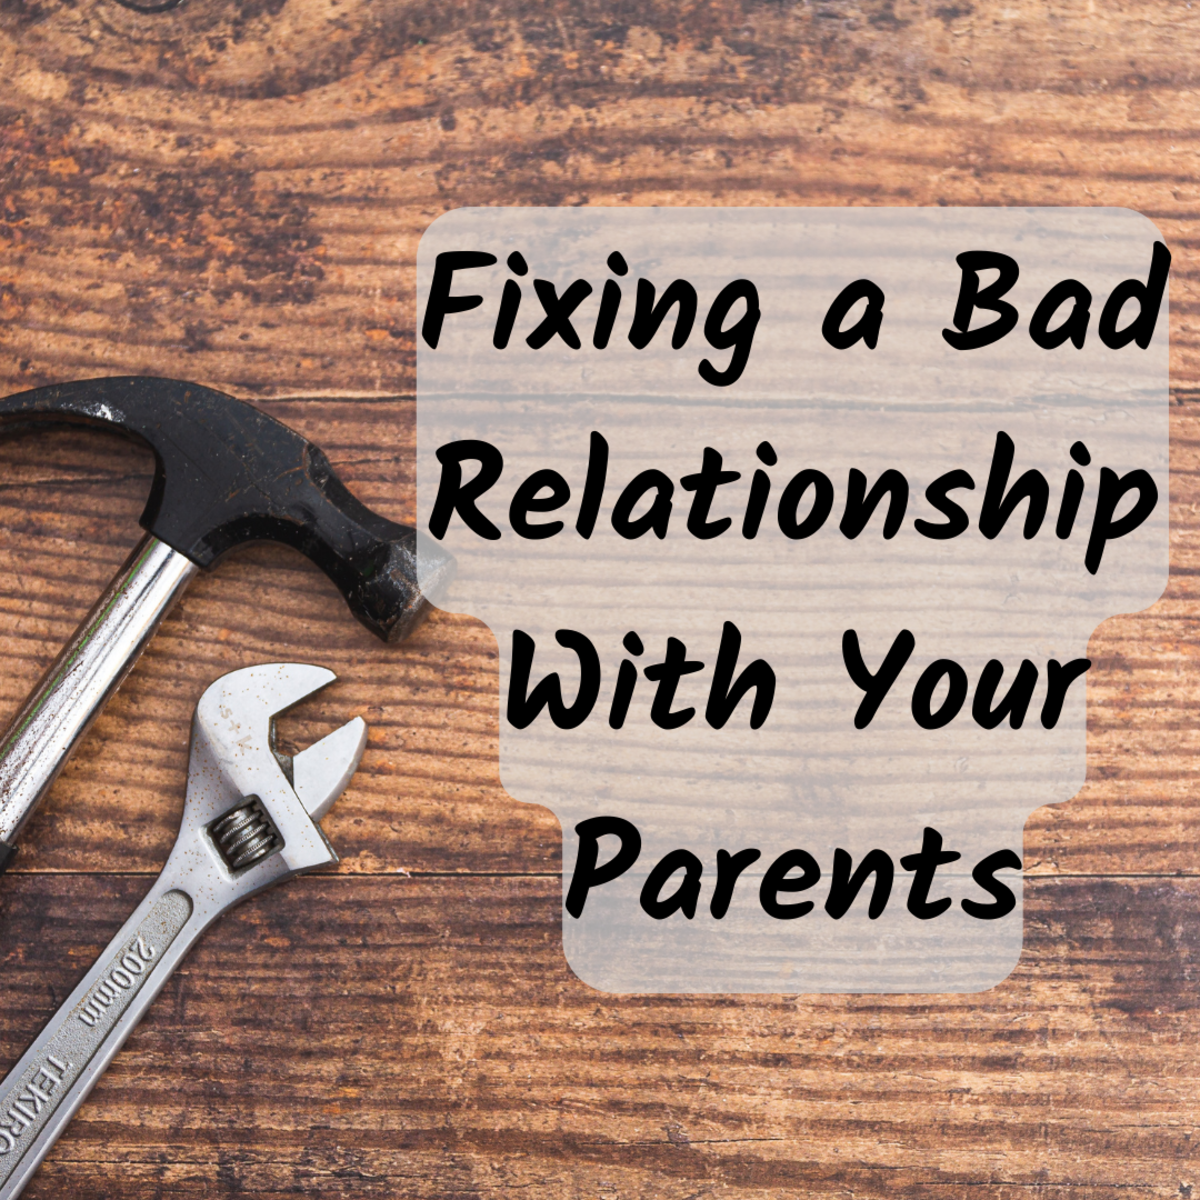 Read on for some important tips and processes to use when trying to repair your relationship with your parents. This article is based on the author's real life experiences.